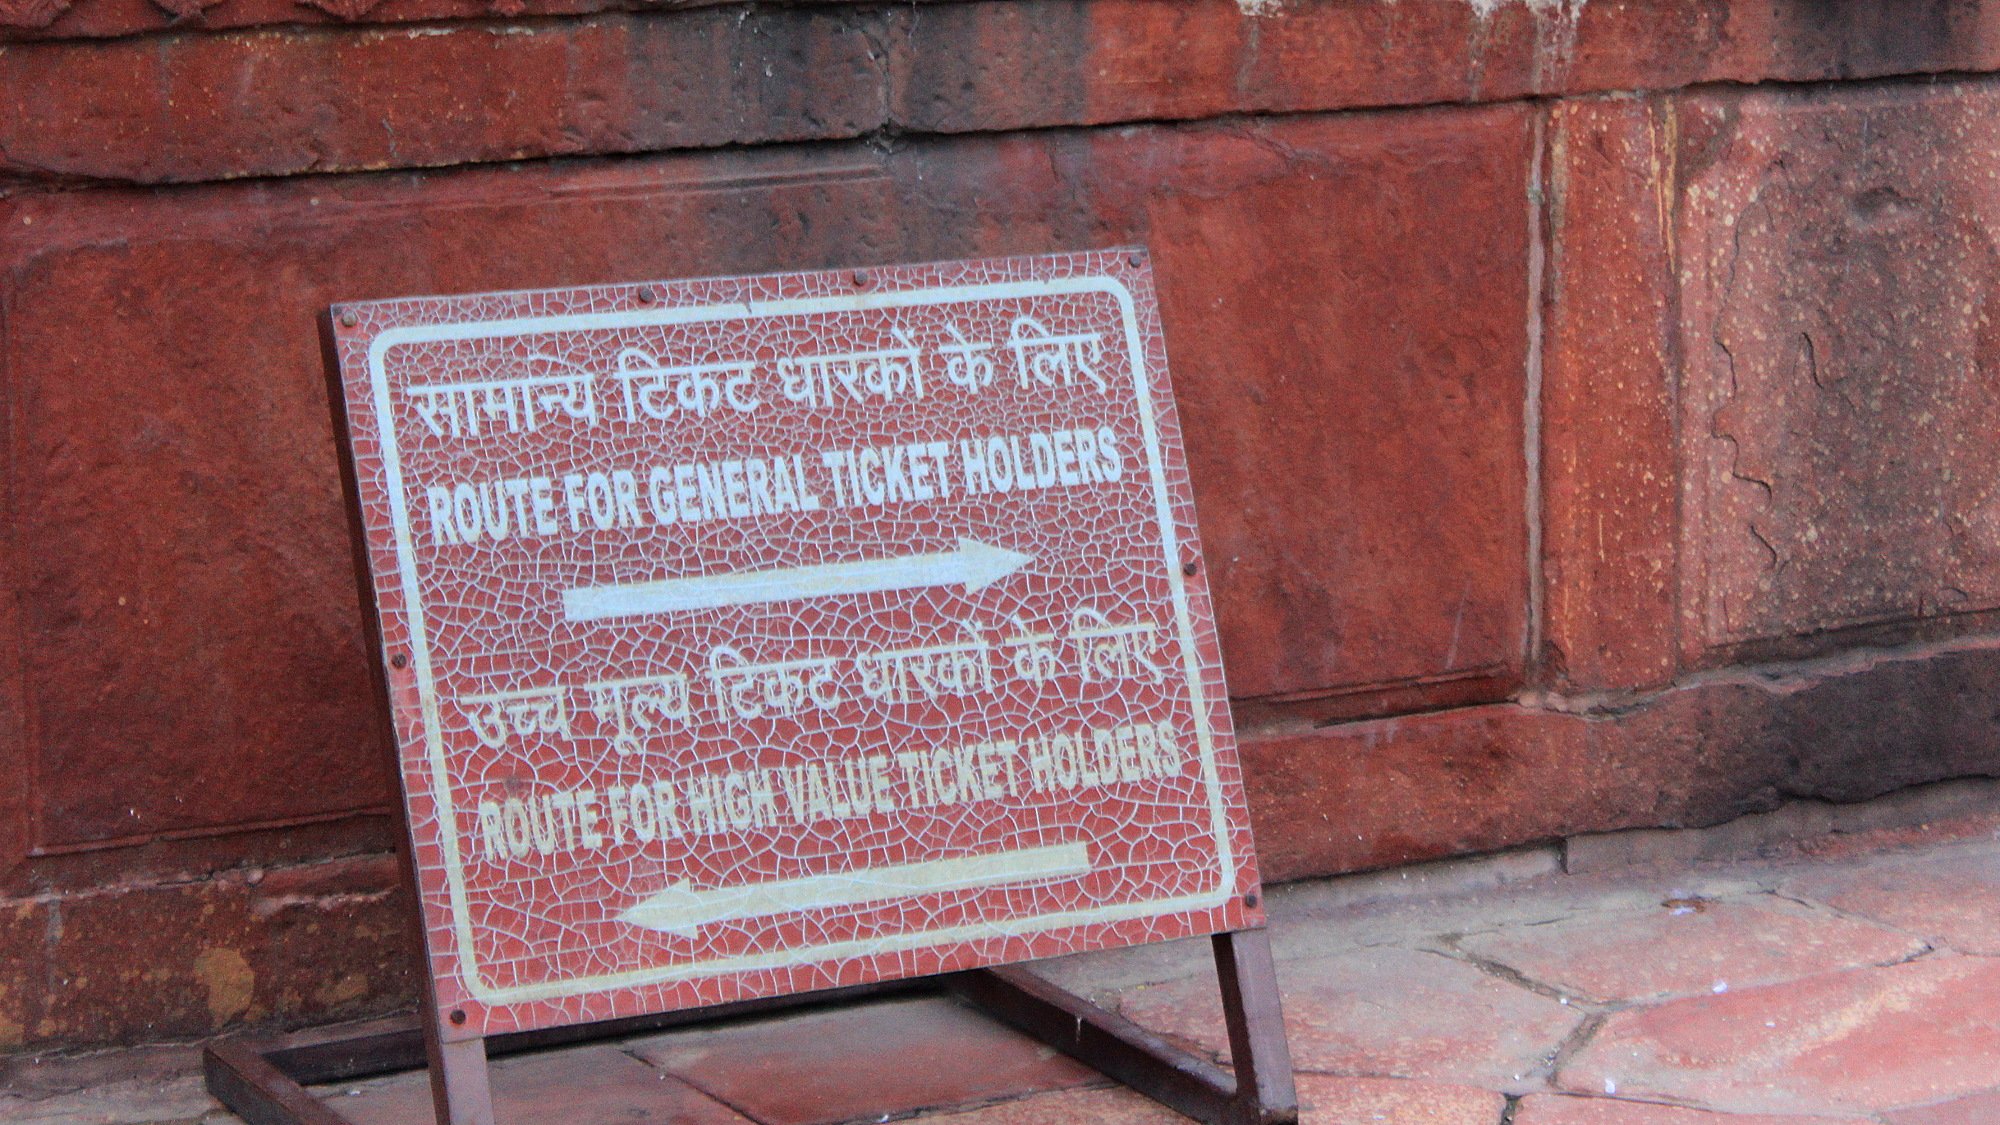 A red signs showing different routes for general ticket holders and high value ticket holders at Taj Mahal, Agra.